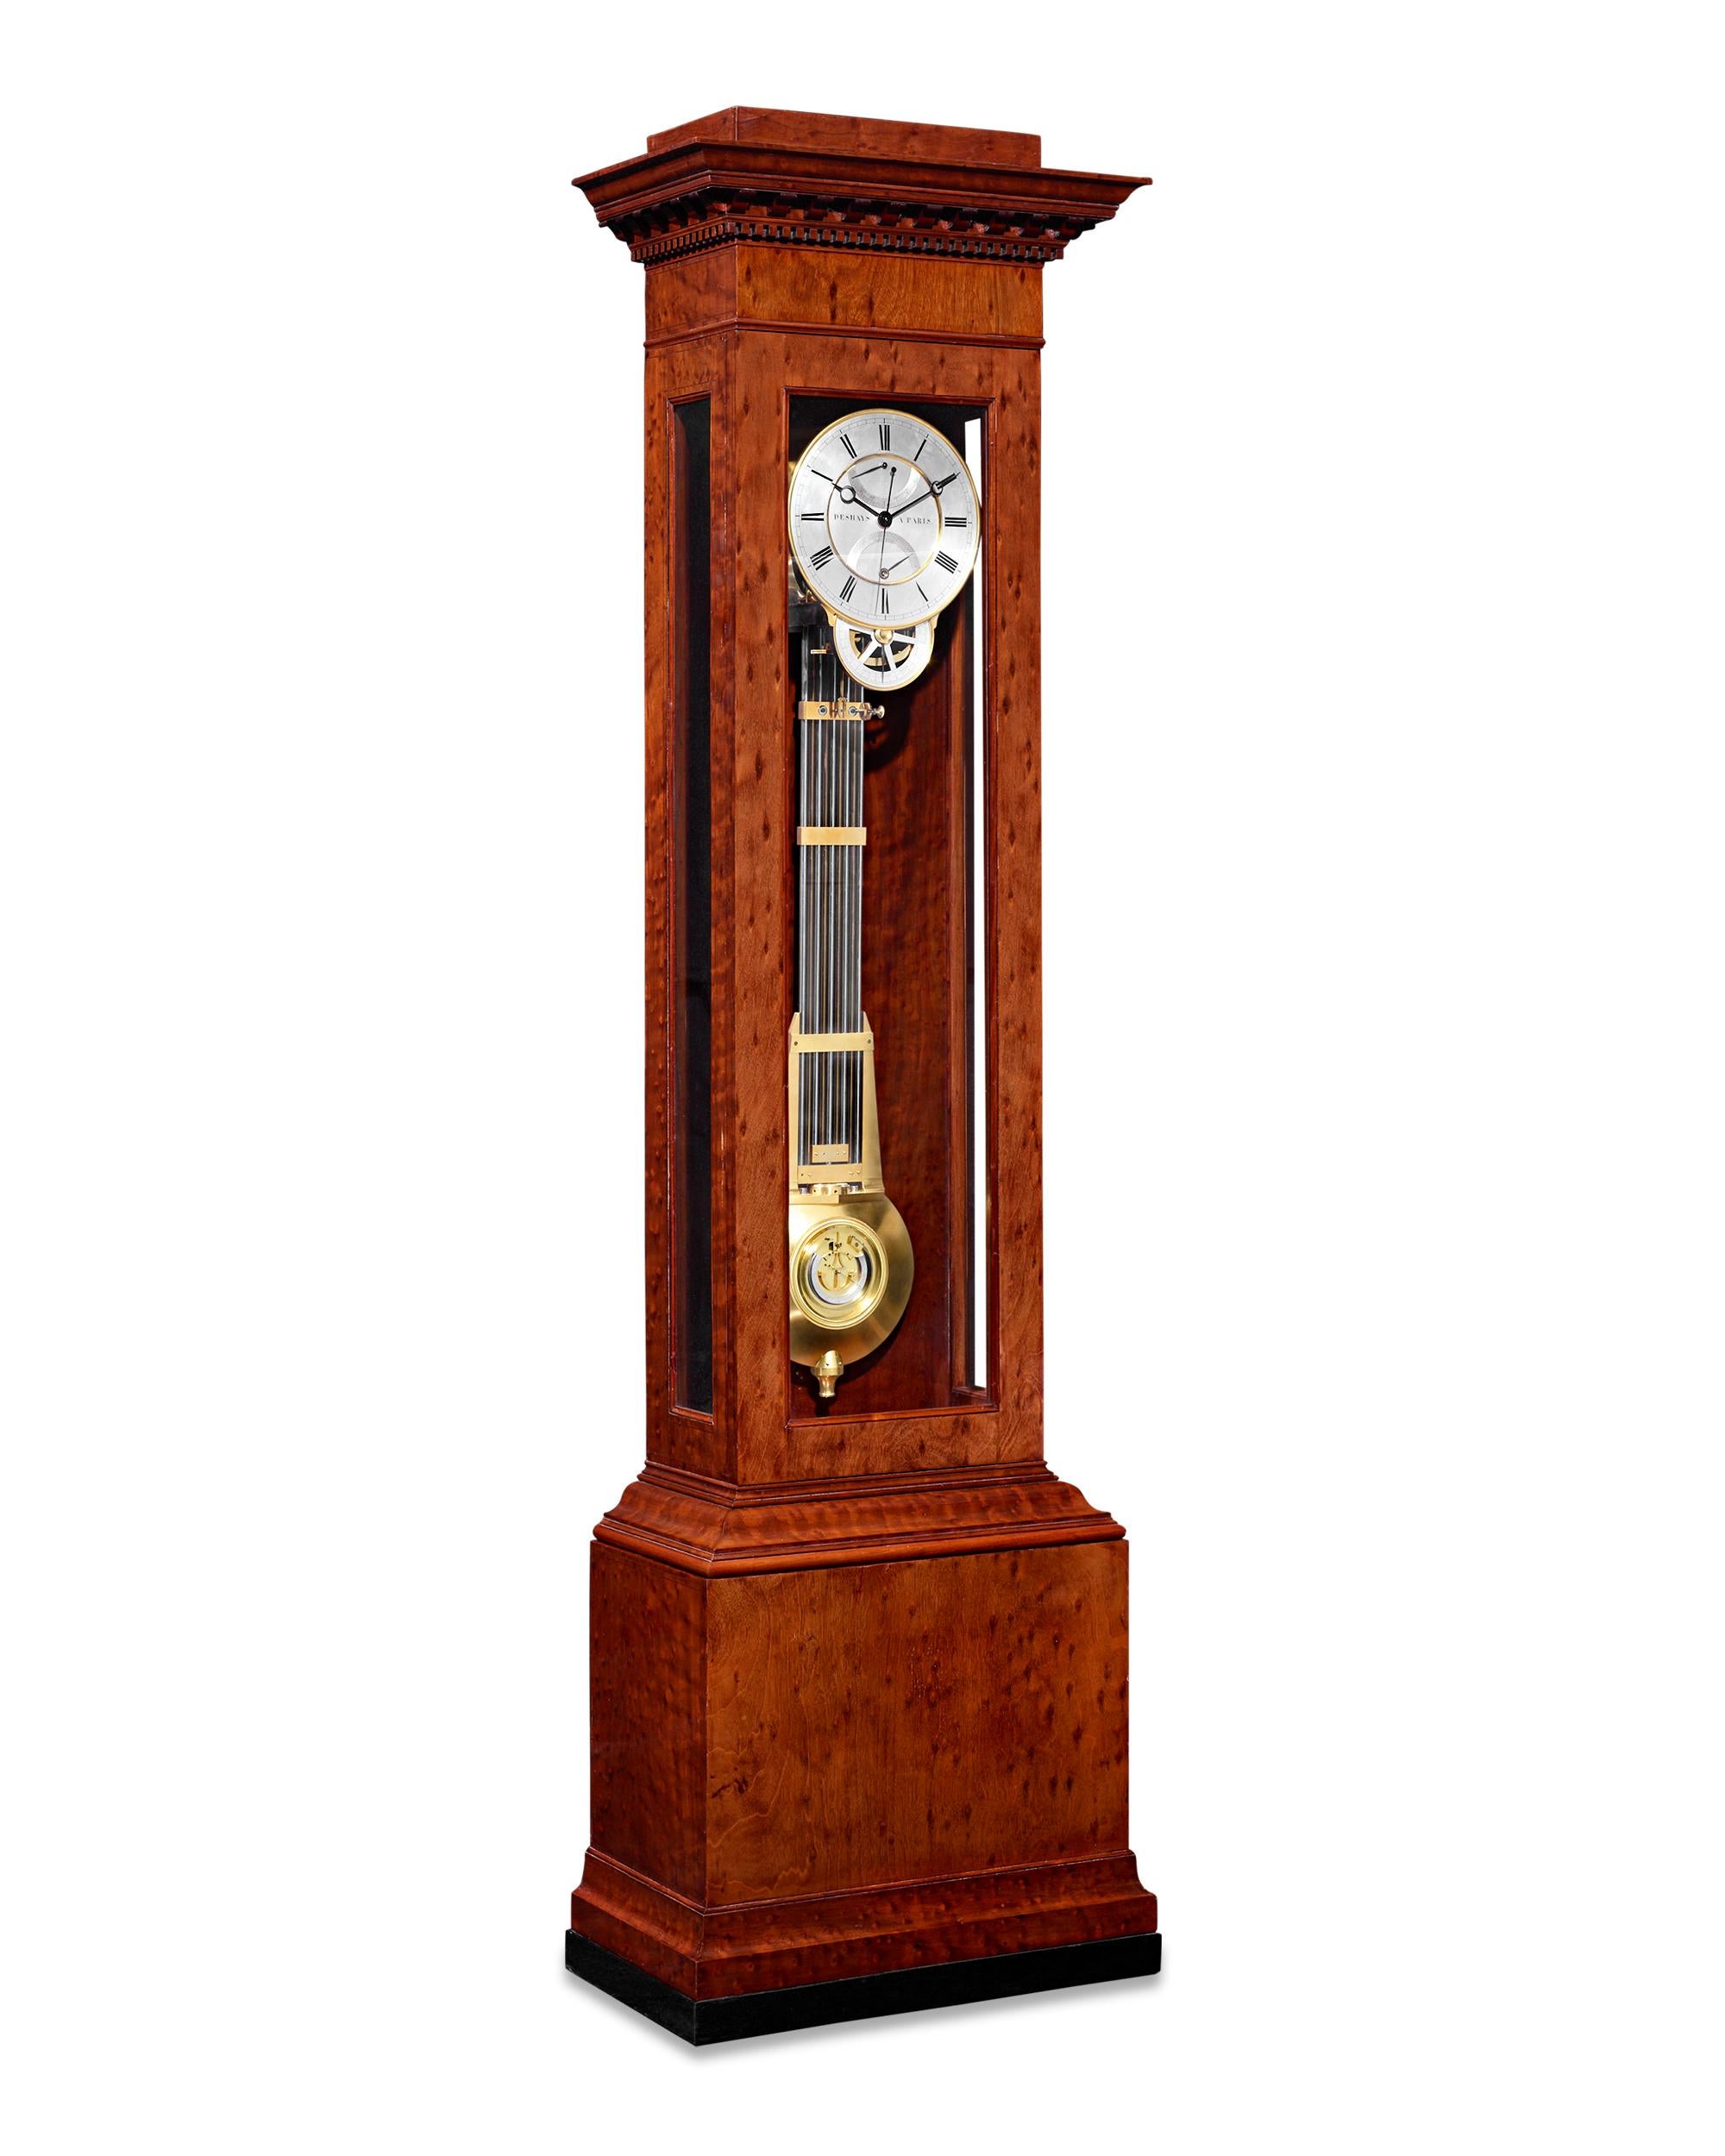 This Louis-Philippe-period month-going longcase regulator clock is an exceptional example of French clockmaking, and its complicated mechanism marks several different aspects of passing time. Crafted by Deshays à Paris, the timepiece displays sleek